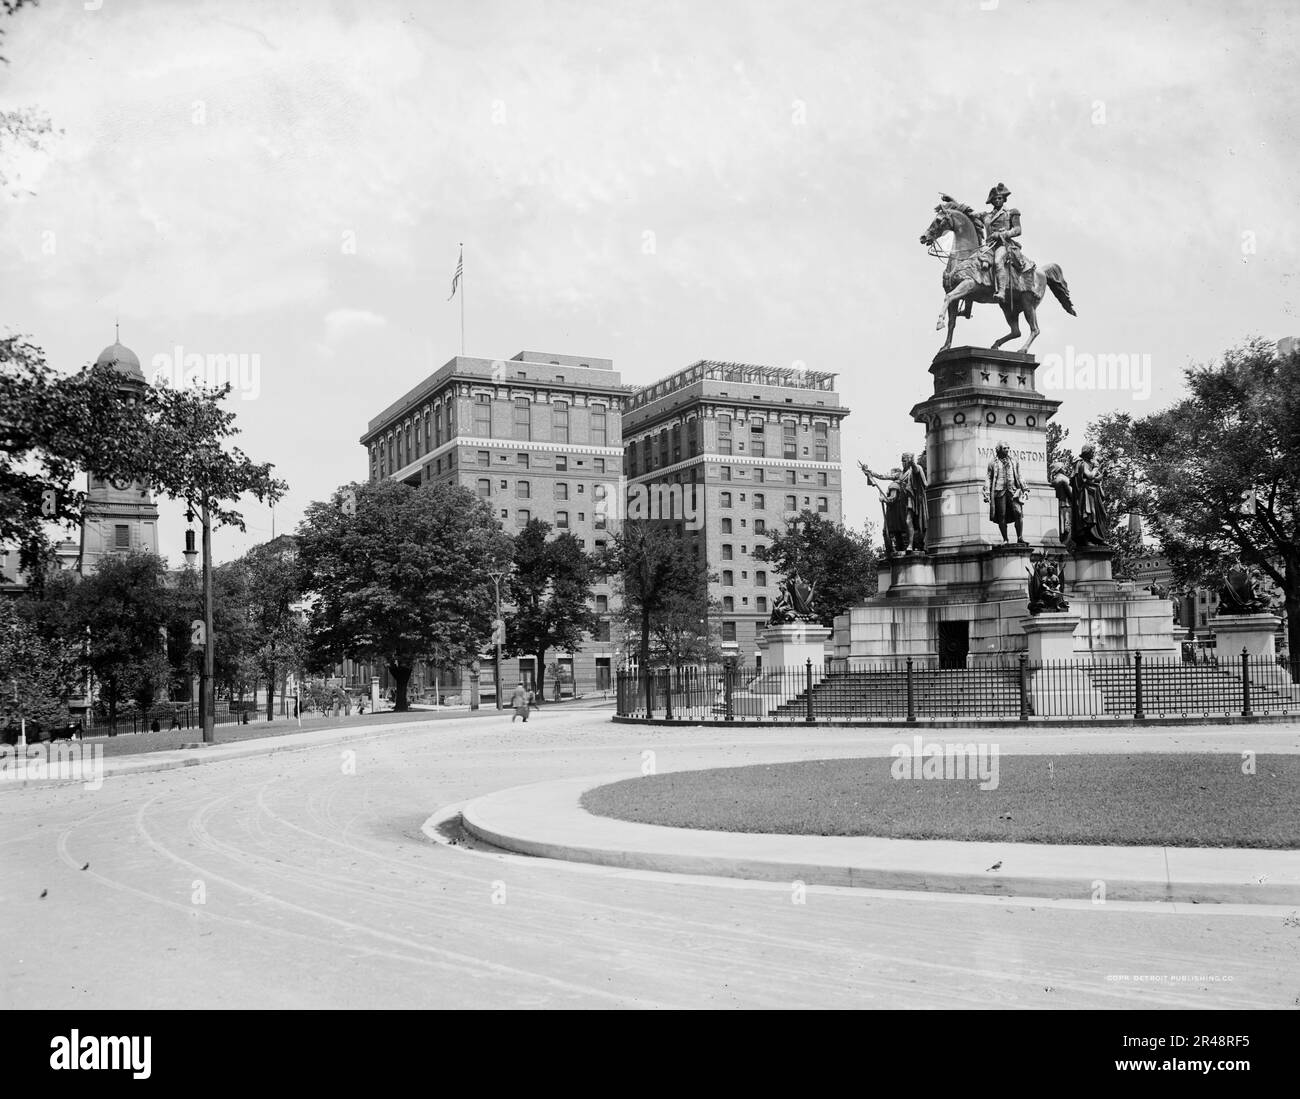 Hotel Richmond from the Capitol, Richmond, Va., c.between 1910 and 1920. Capitol Square and Washington Monument in foreground. Stock Photo